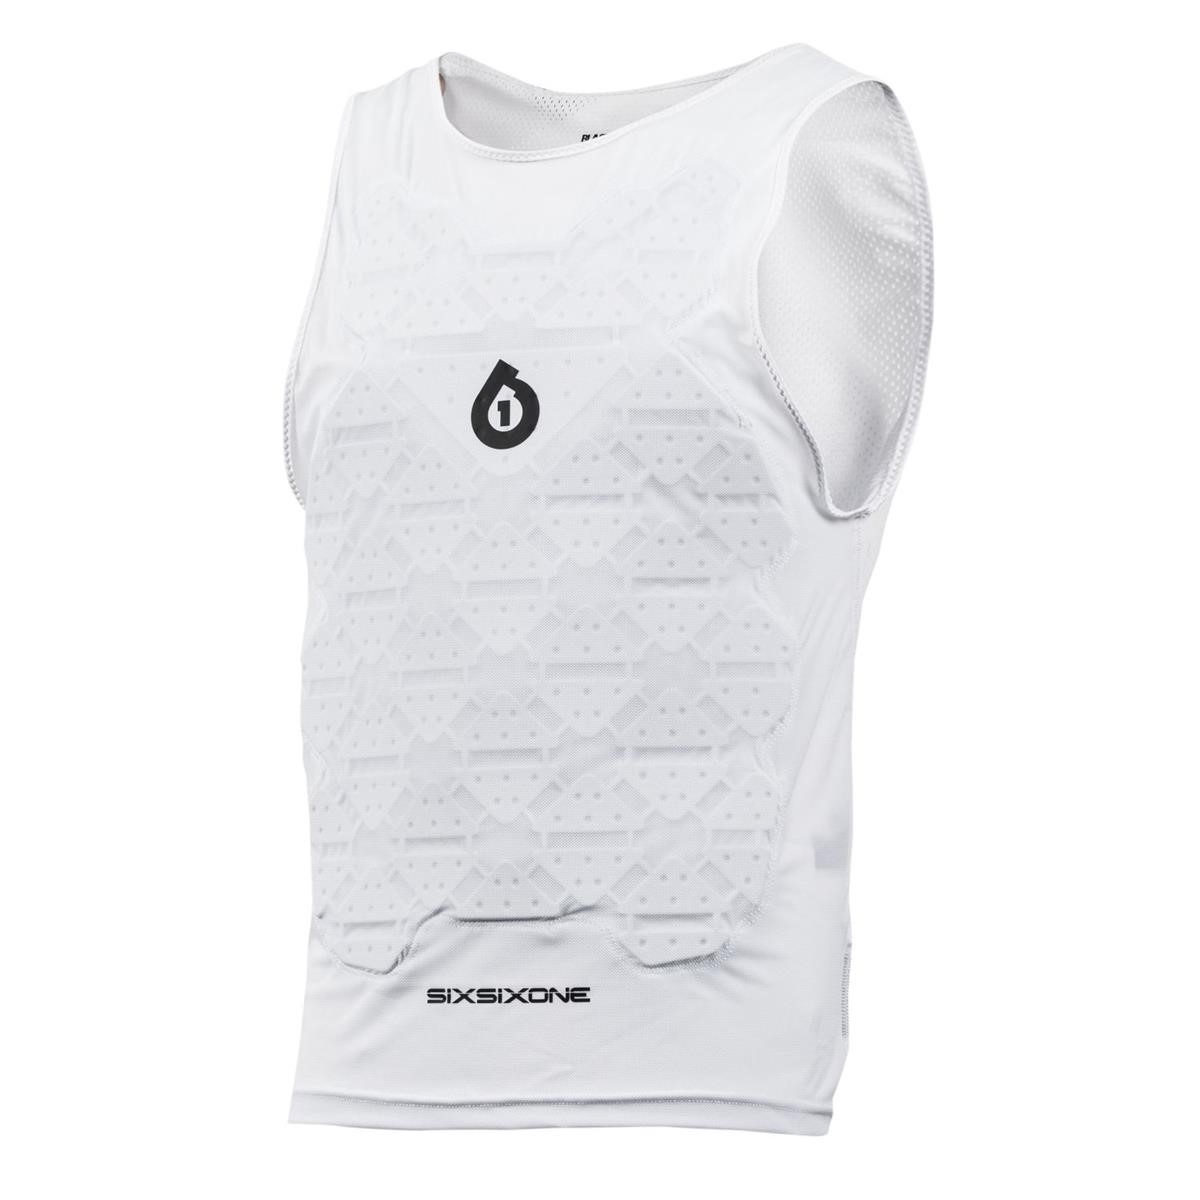 SixSixOne Maillot de Protection sans Manches Blaster White